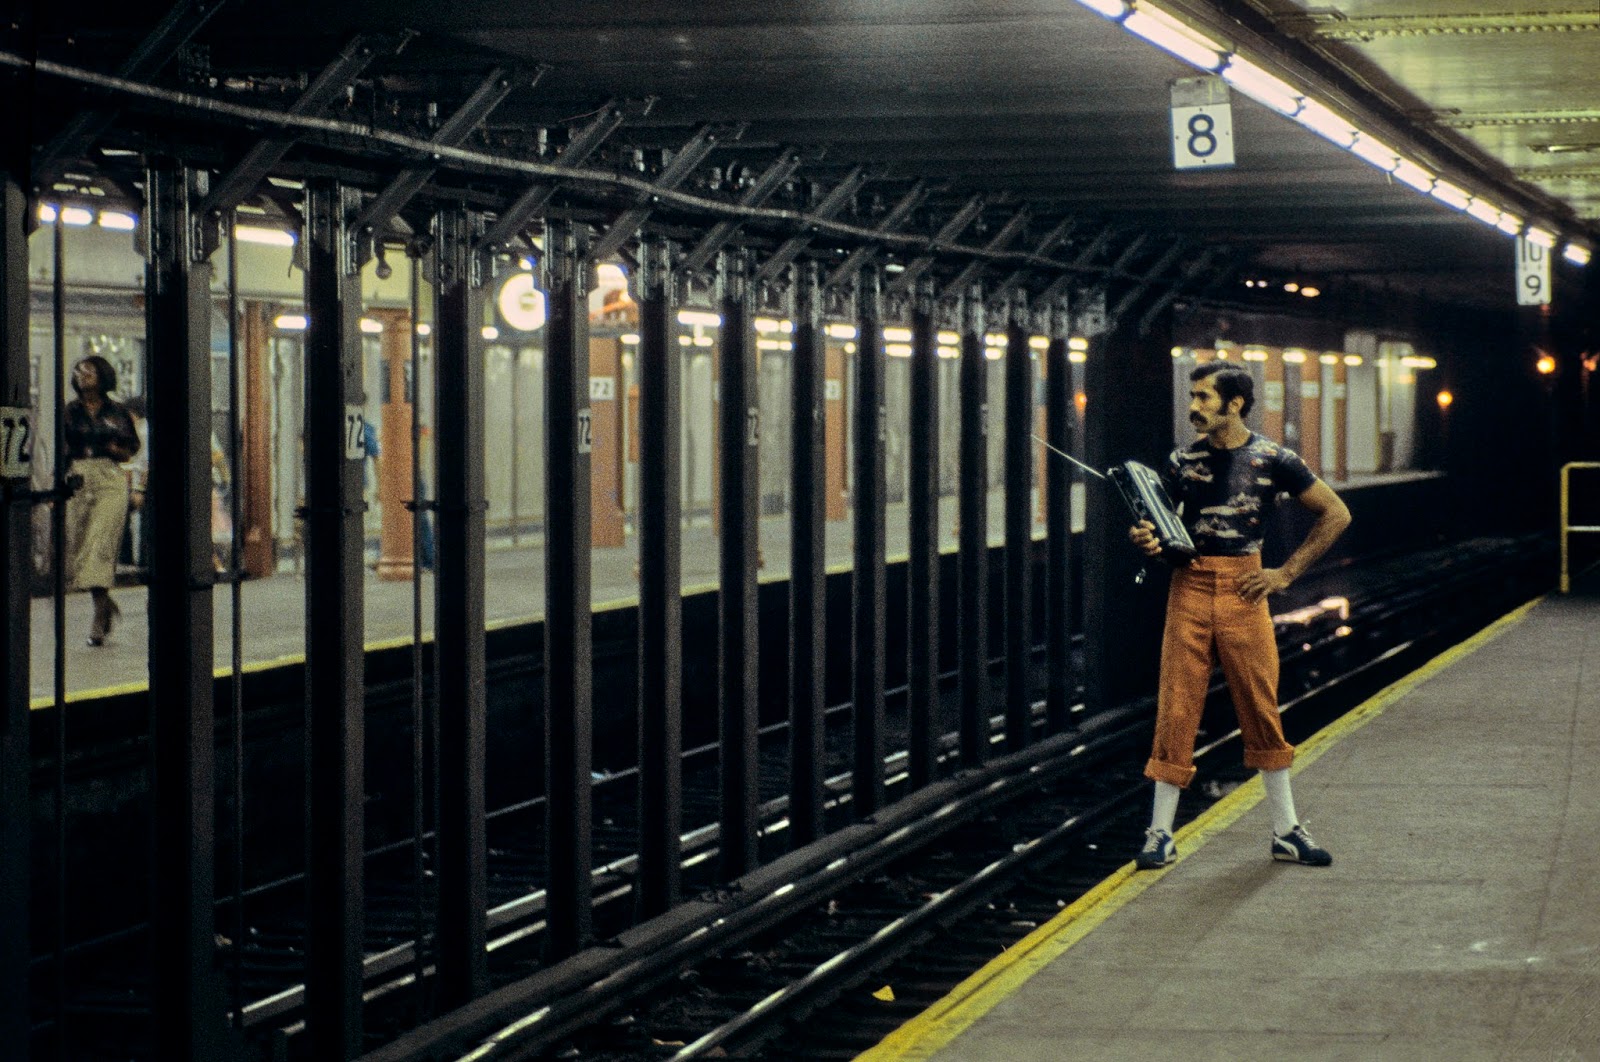 Eerie Photos Of NYC Subway From 70's & 80's Shed New Light On City